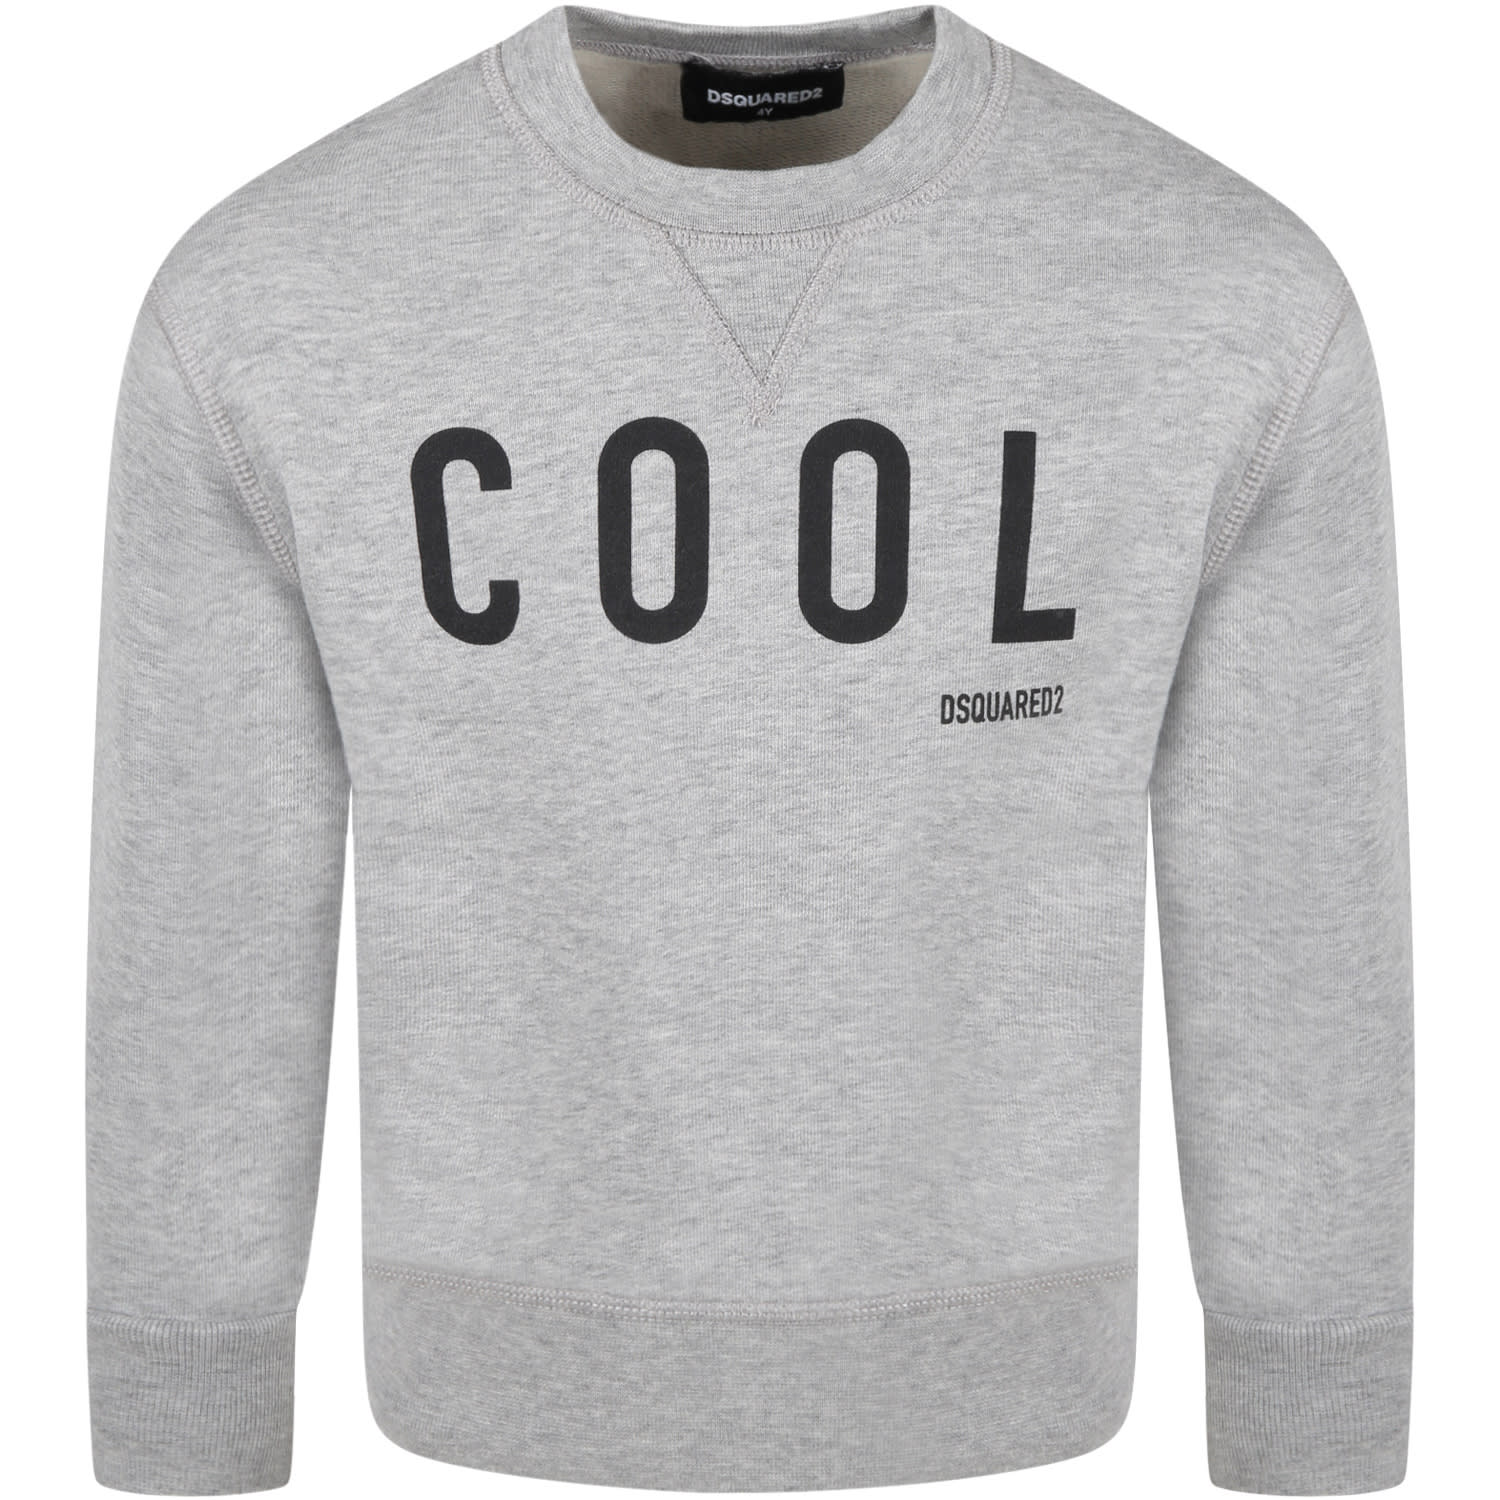 Dsquared2 Gray Sweatshirt For Boy With Black Logo